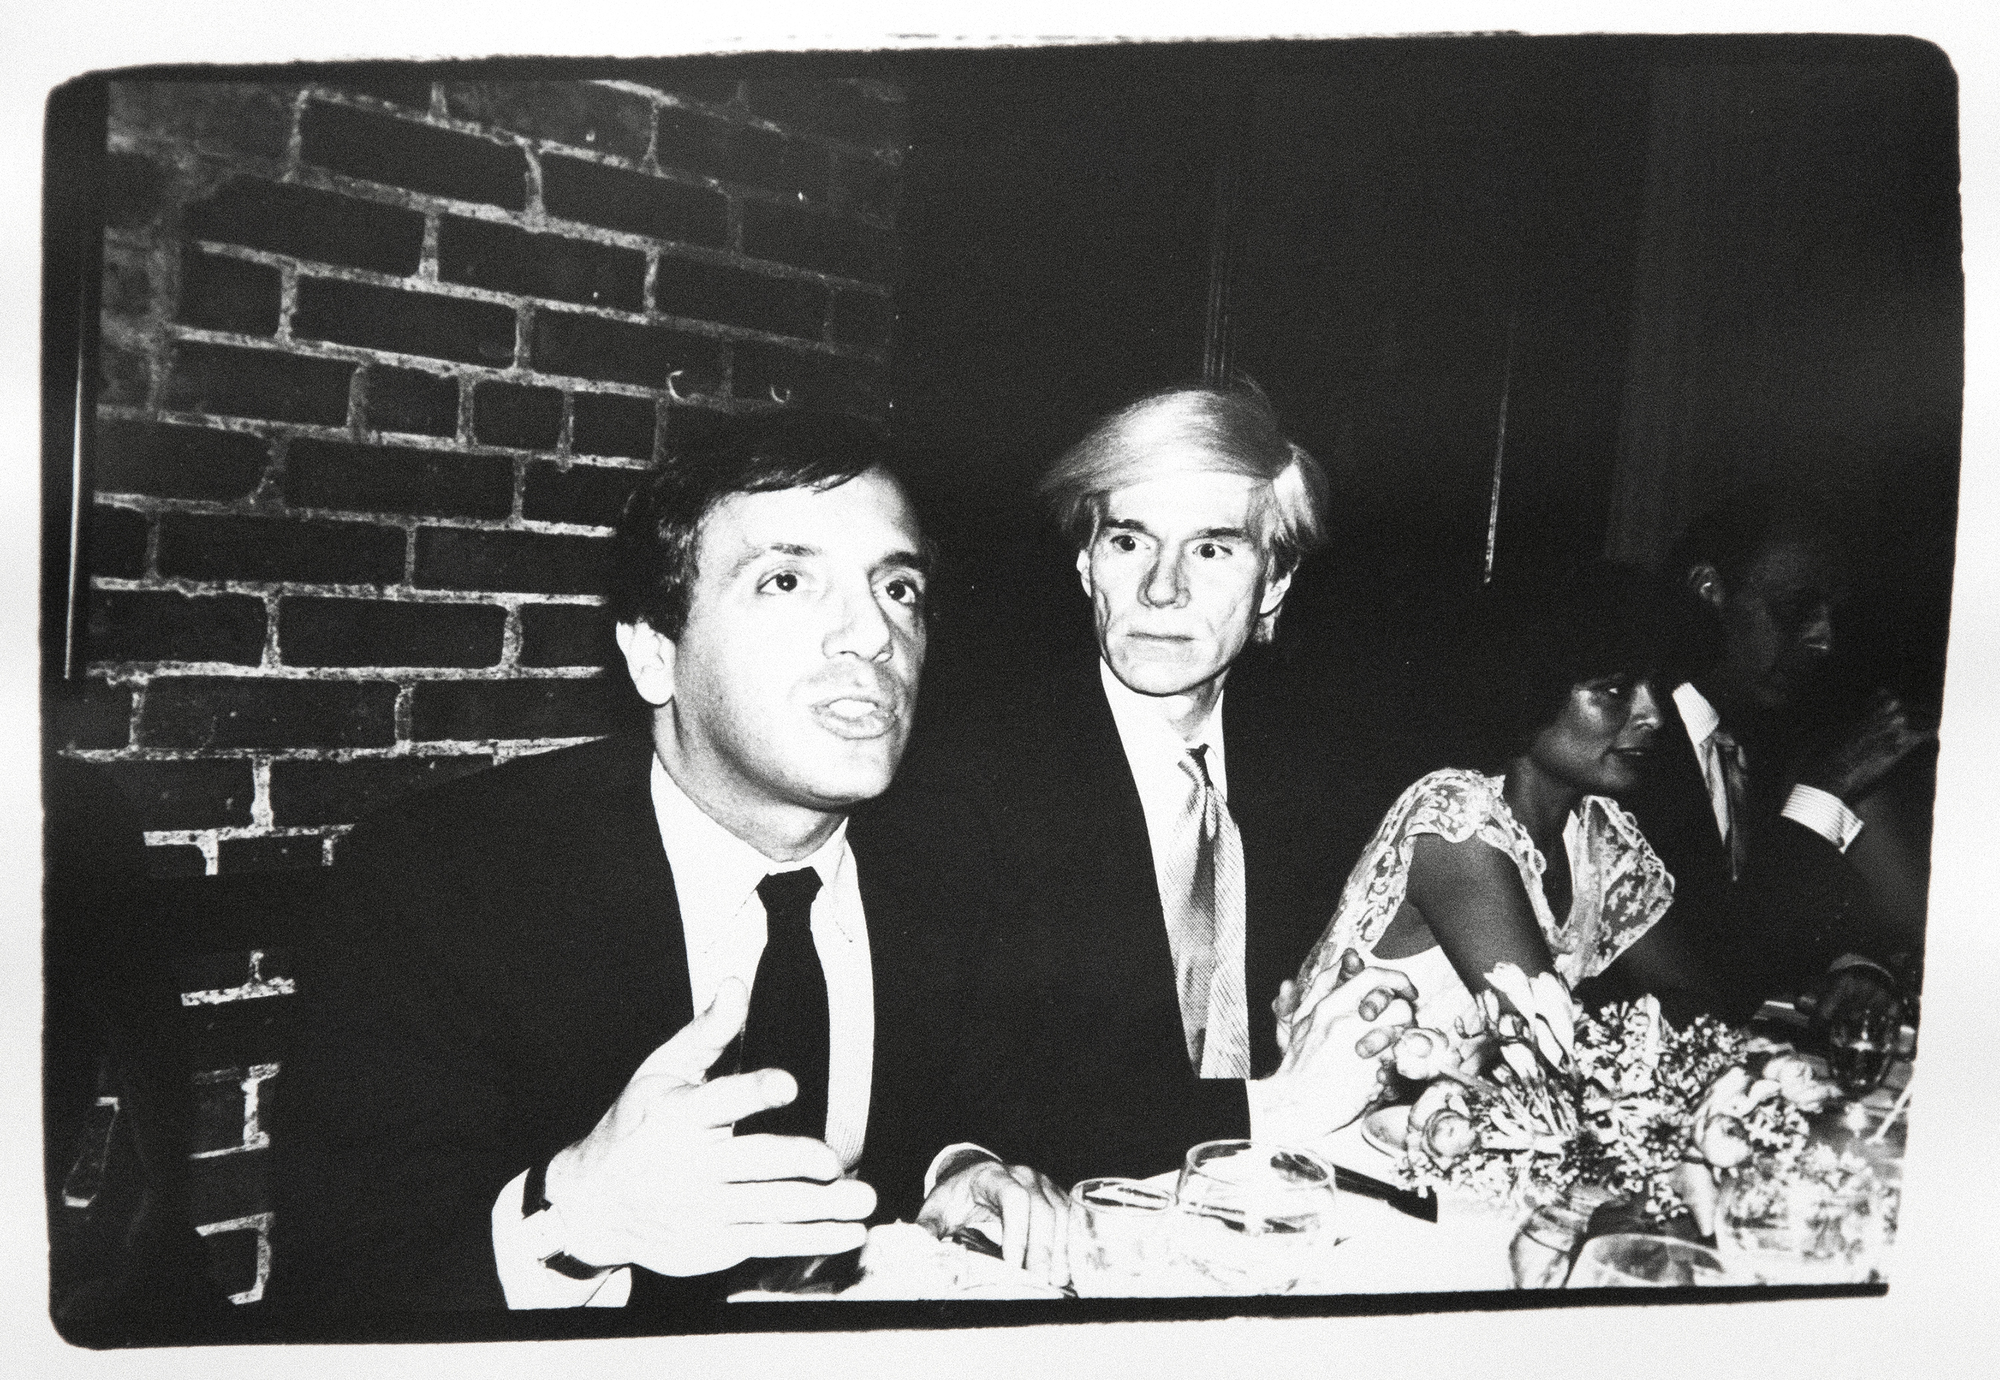 ANDY WARHOL - Andy and Steve Rubell - シルバーゼラチンプリント - 8 x 10 in.